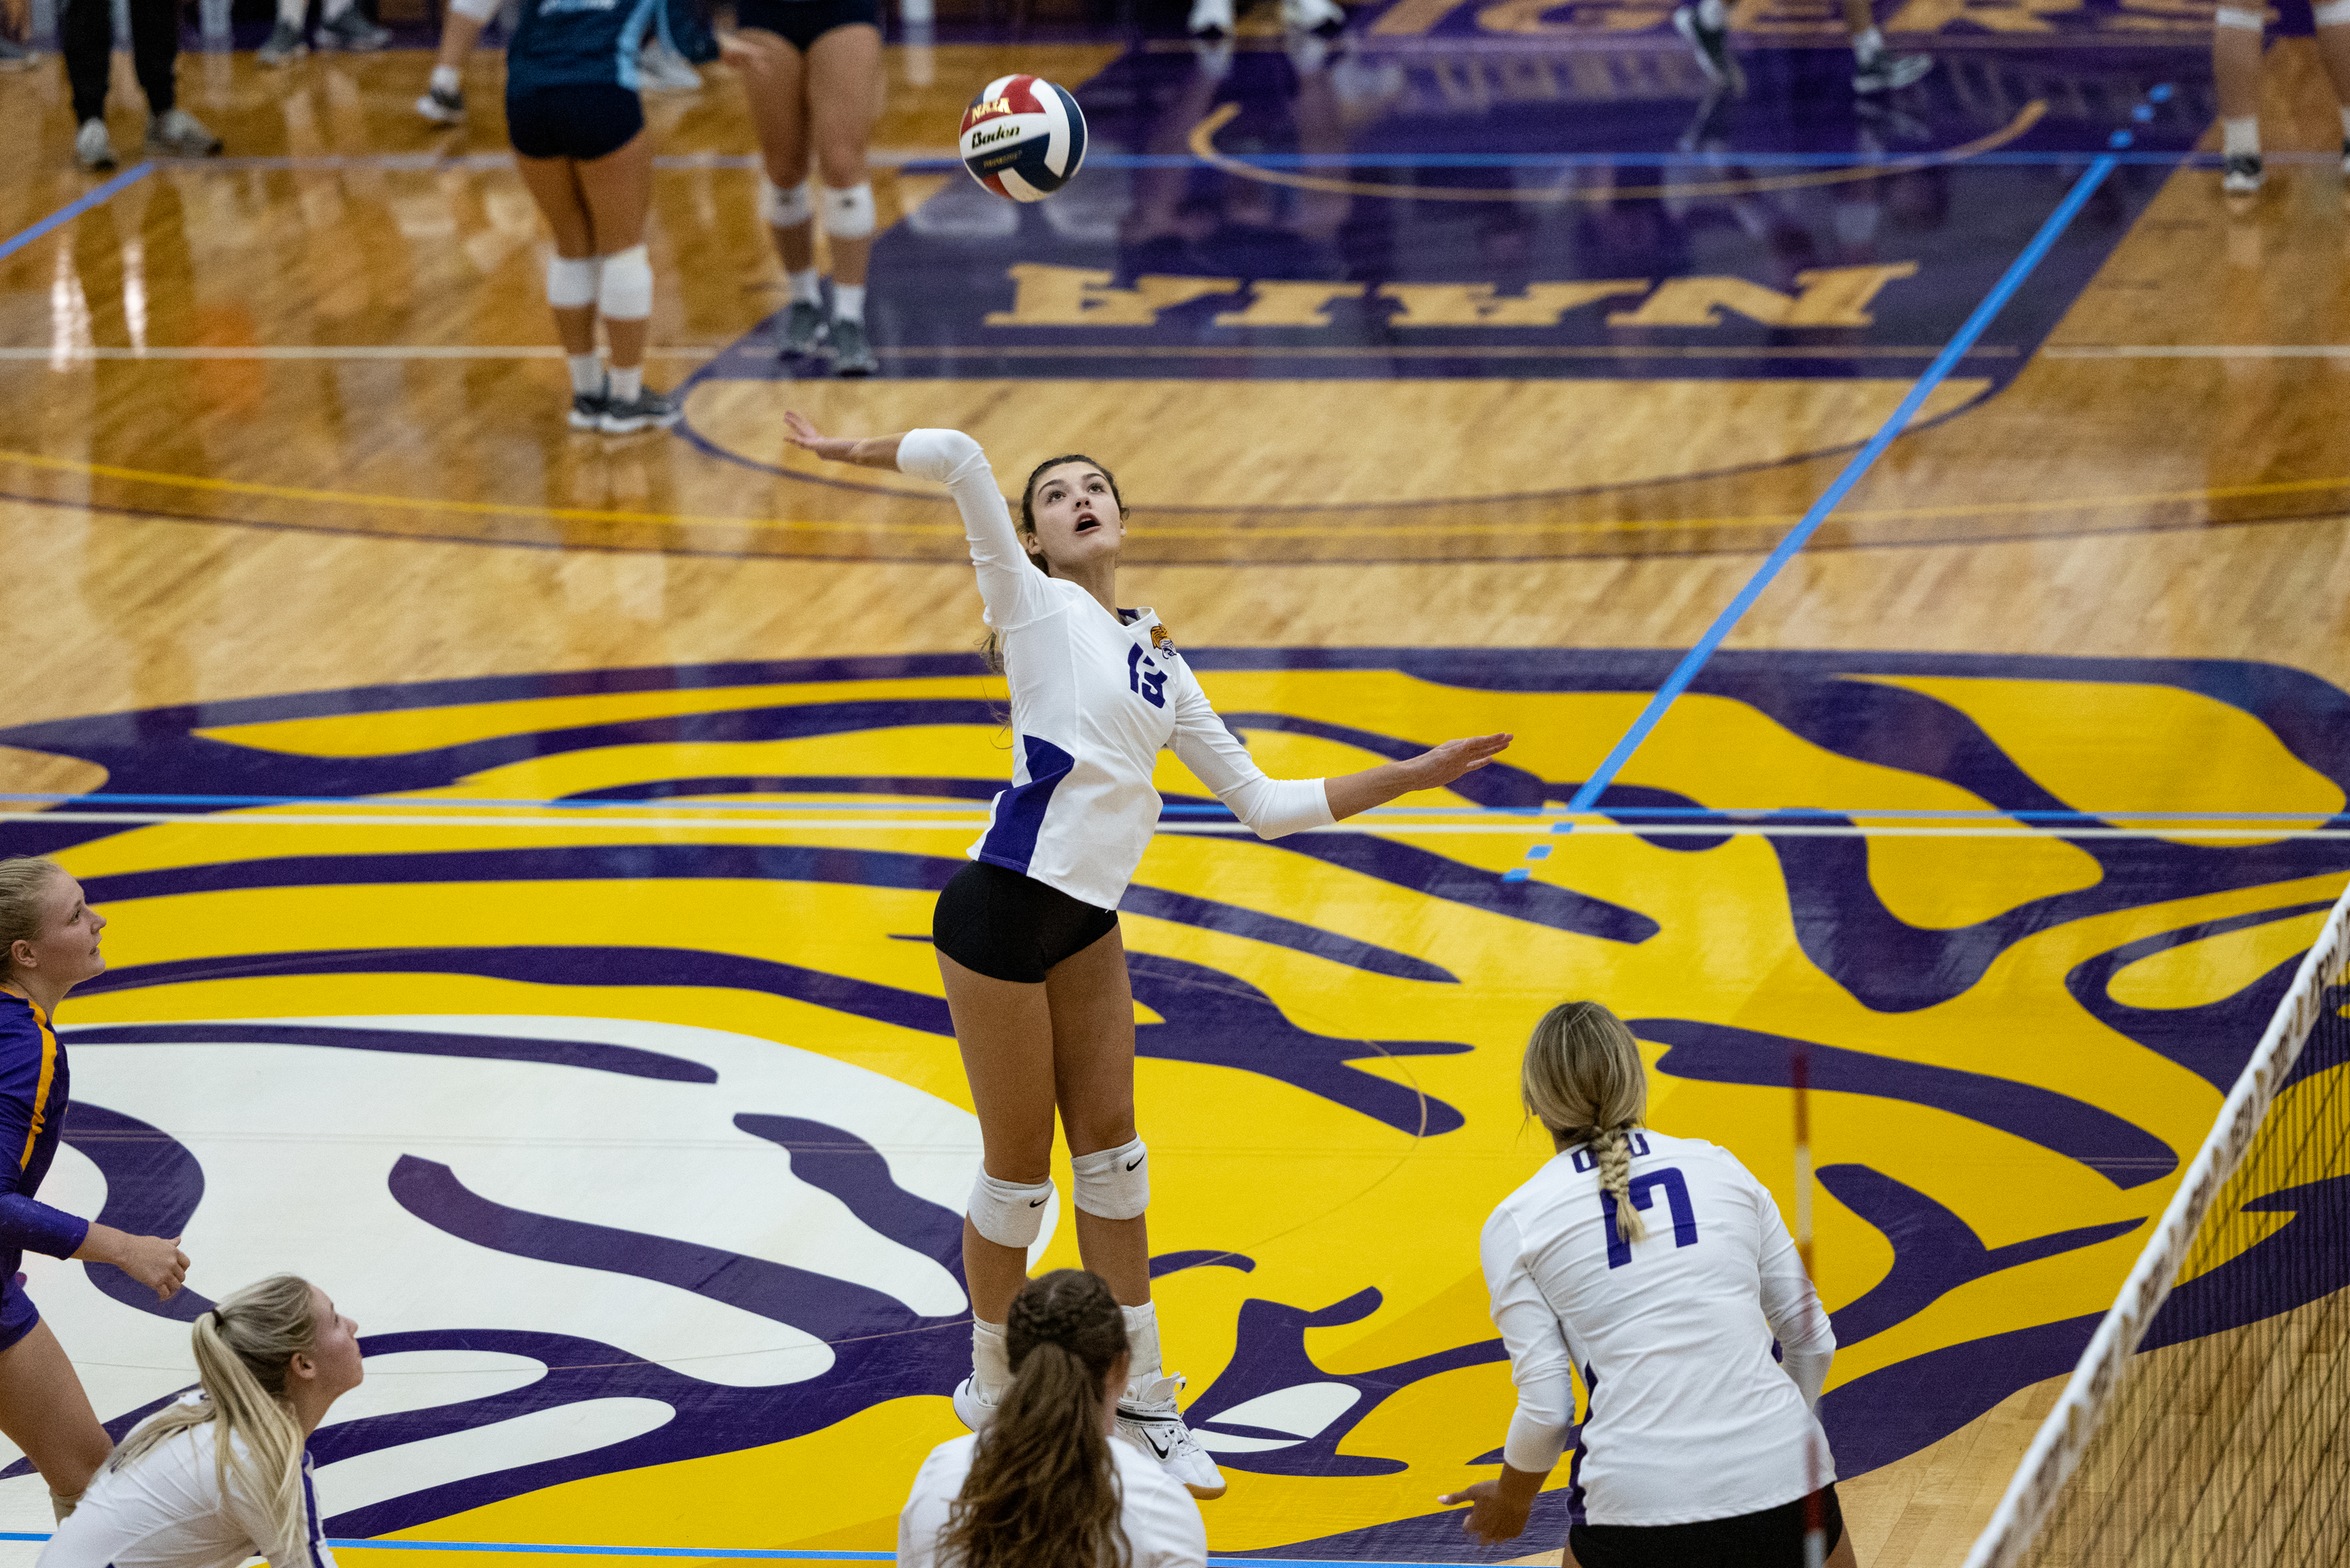 ONU DROPS FIRST TWO MATCHES OF BELLEVUE TOURNAMENT